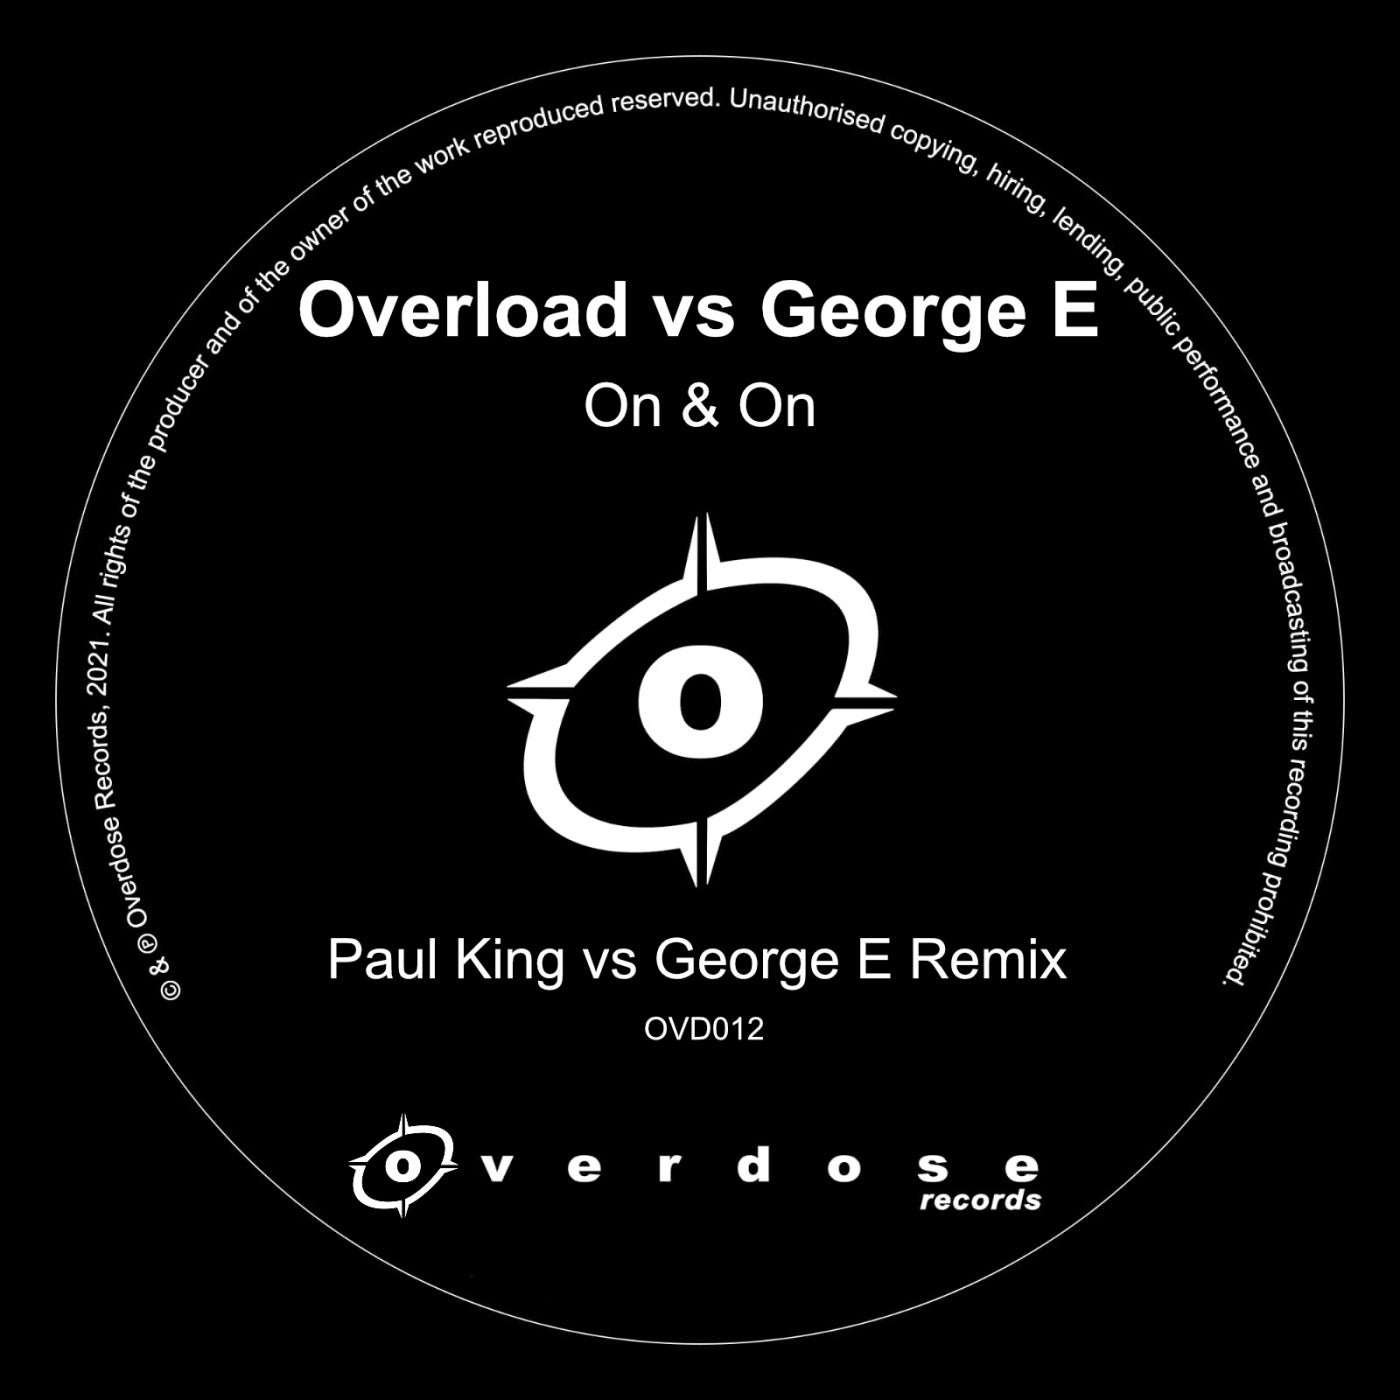 On & On (Paul King & George E Remix)